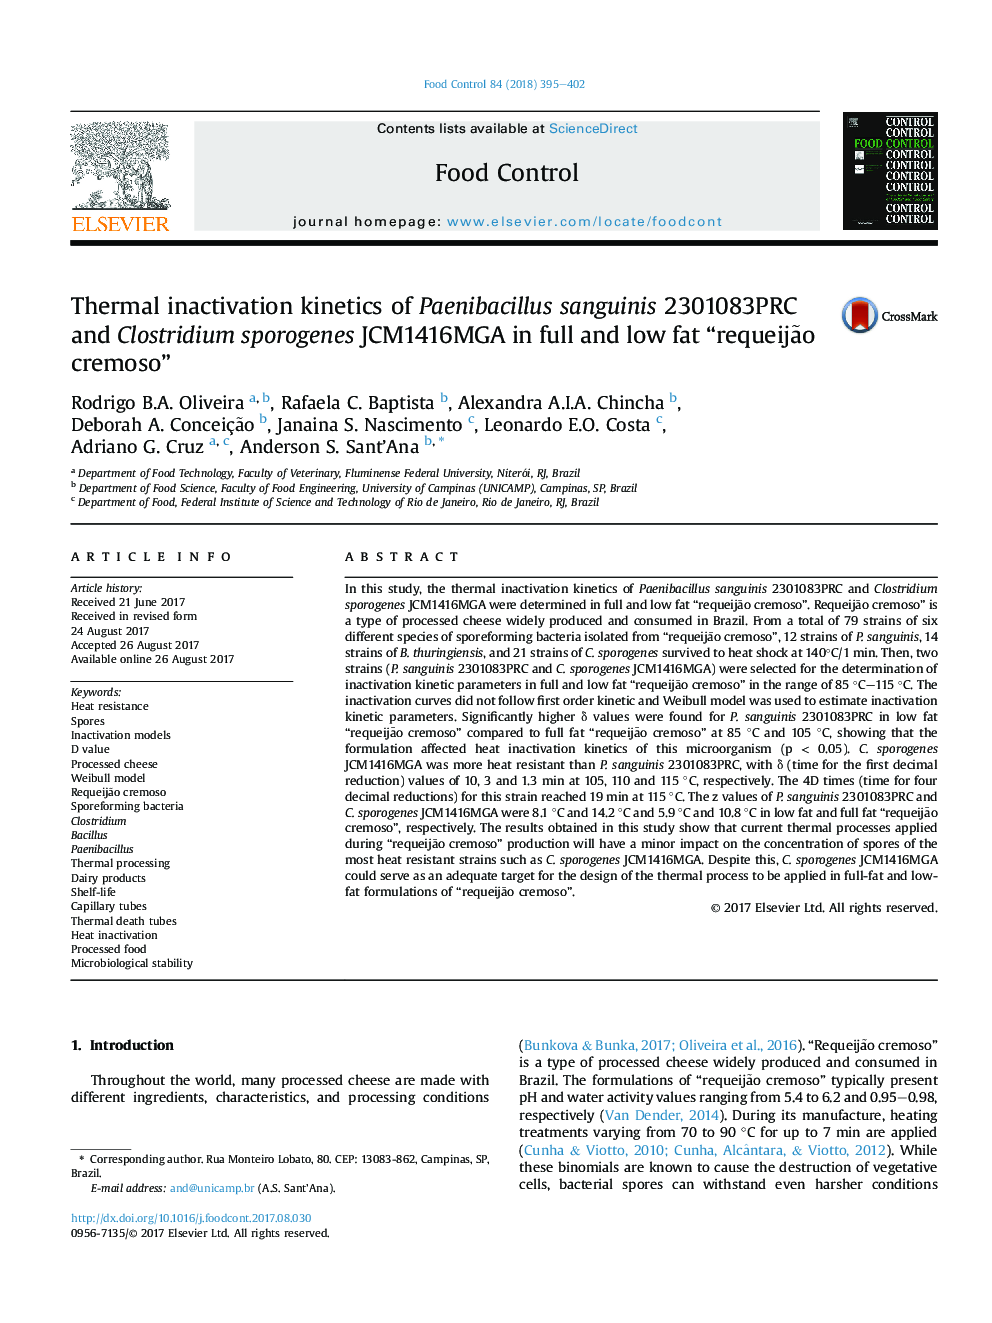 Thermal inactivation kinetics of Paenibacillus sanguinis 2301083PRC and Clostridium sporogenes JCM1416MGA in full and low fat “requeijÃ£o cremoso”